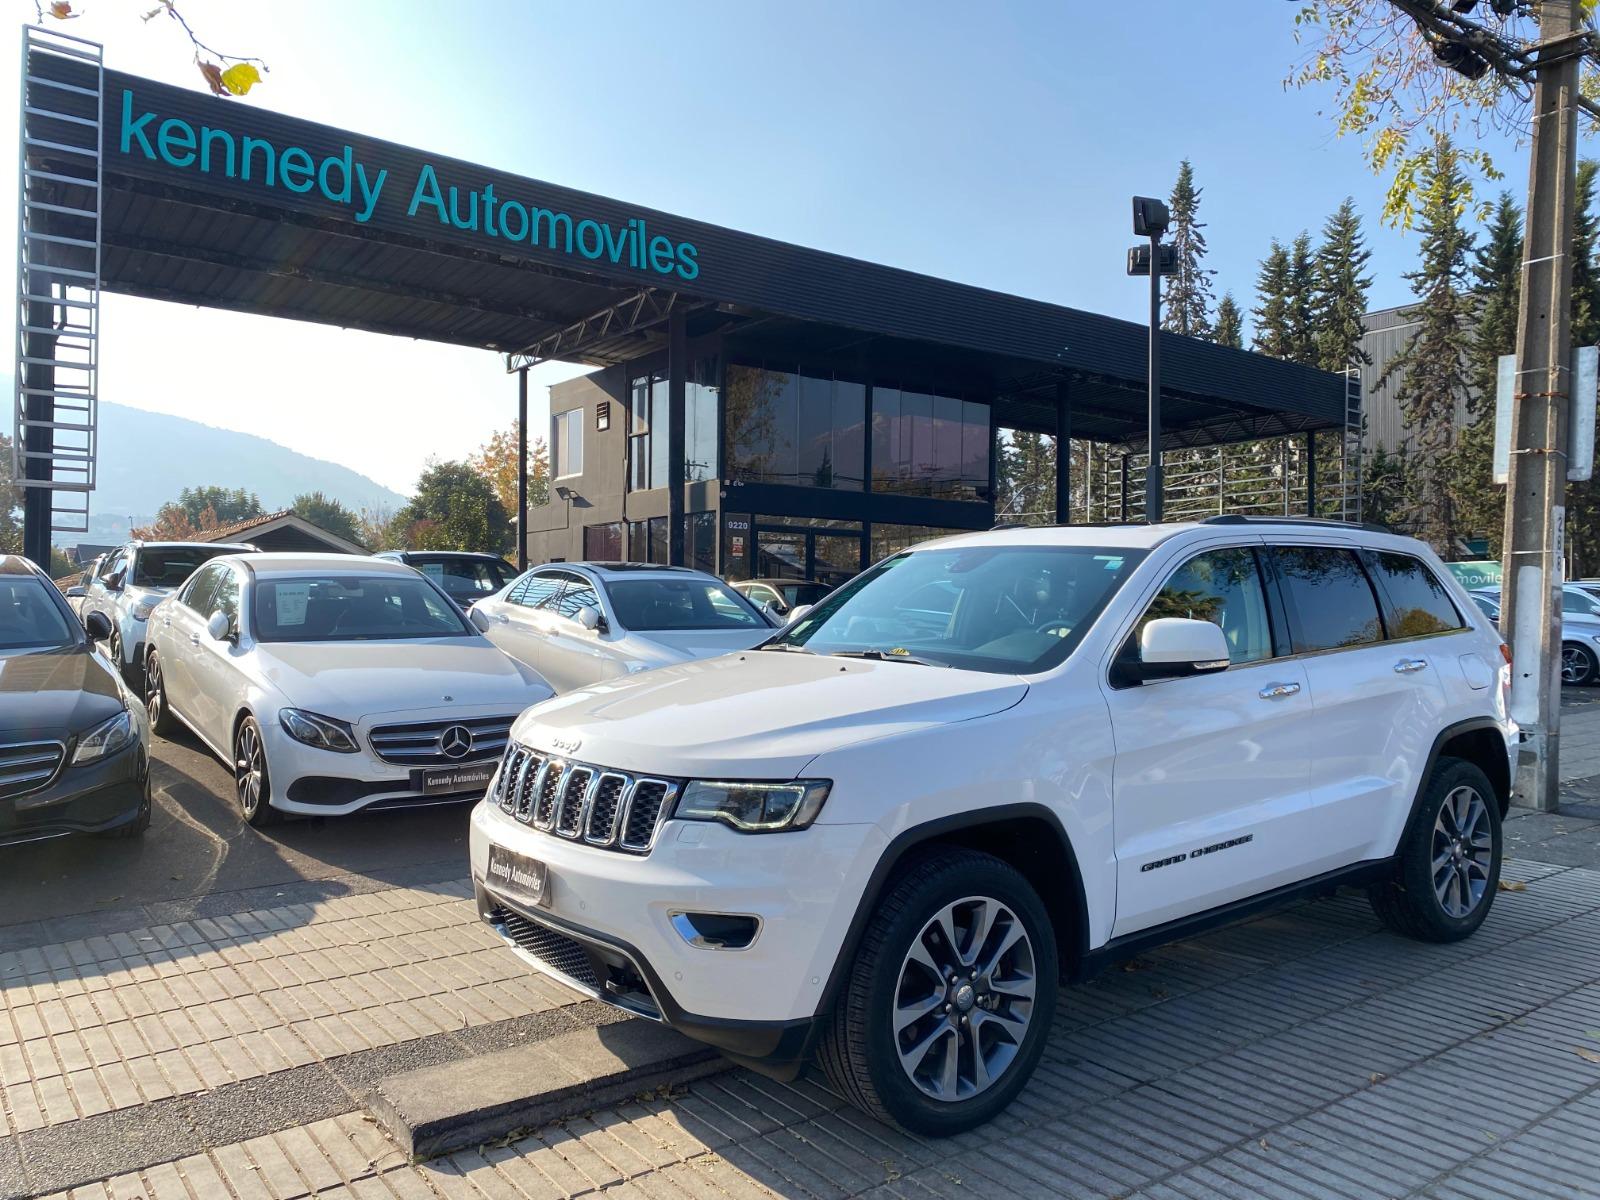 JEEP GRAND CHEROKEE 3.0 CRD Limited 4WD Auto 2018 Impecable - KENNEDY AUTOMOVILES